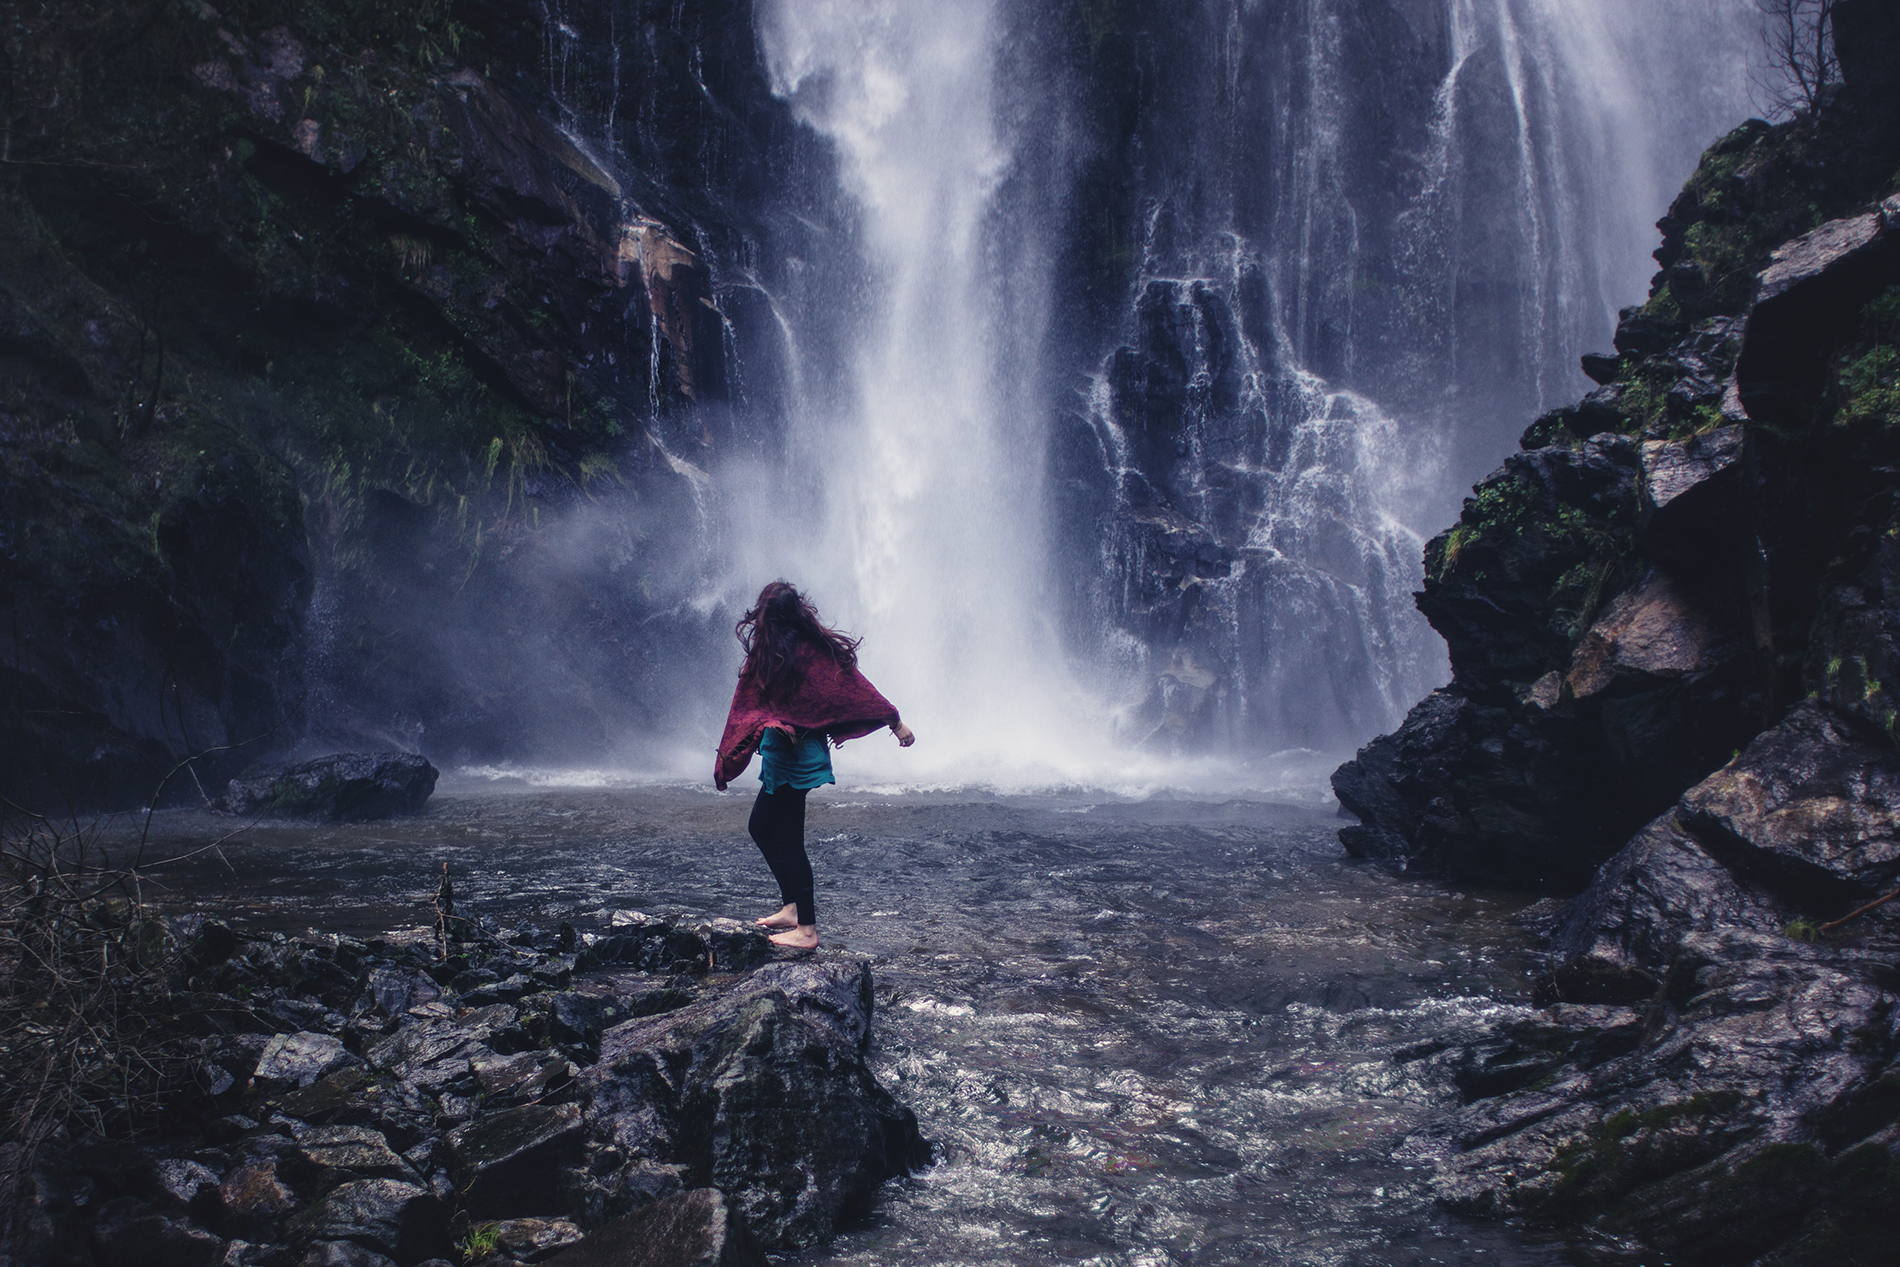 A young woman who travels for free dancing happily under a waterfall.